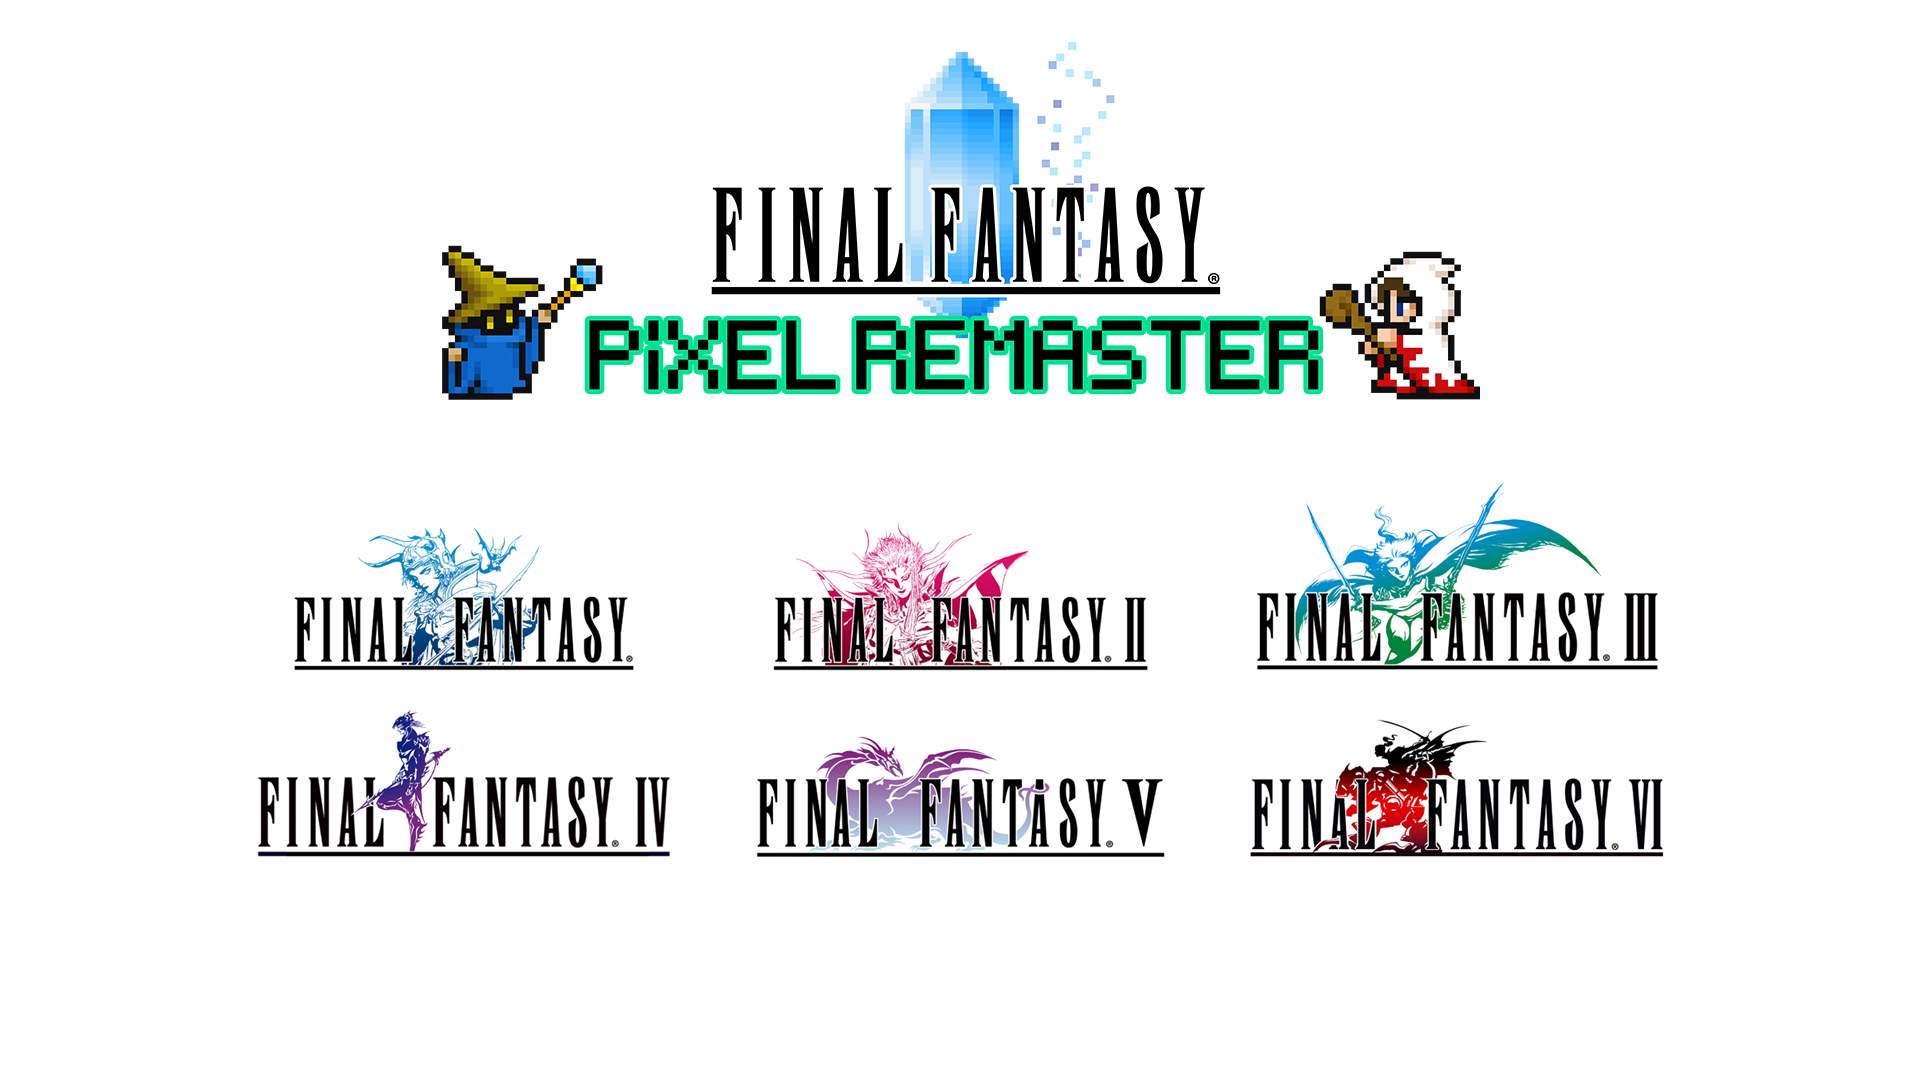 An image with the logo for Final Fantasy Pixel Remaster, and the logos for Final Fantasy I-VI.